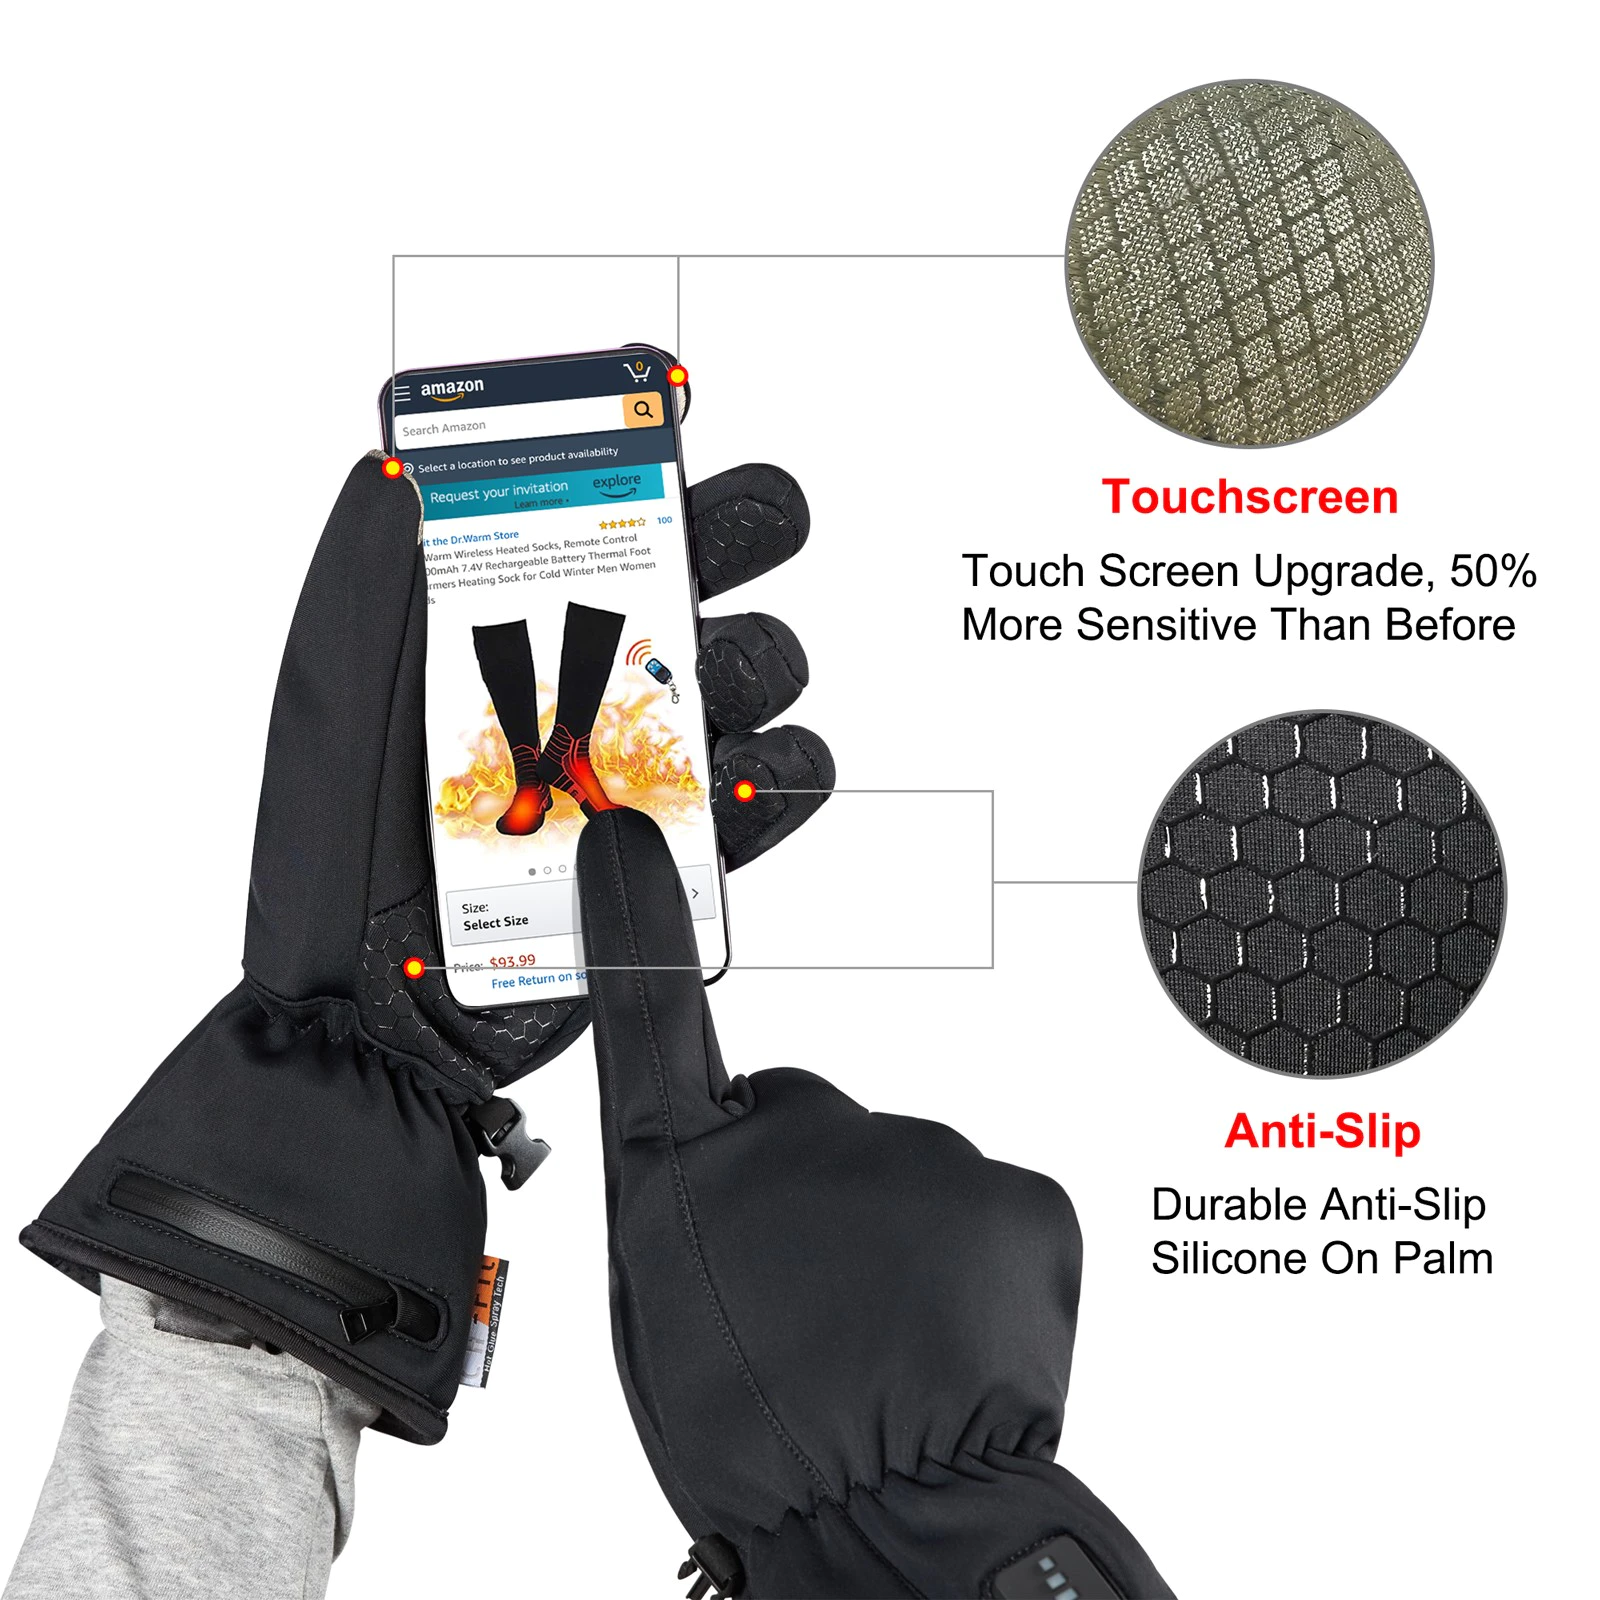 Dr. Warm high quality electrical hand gloves improves blood circulation for ice house